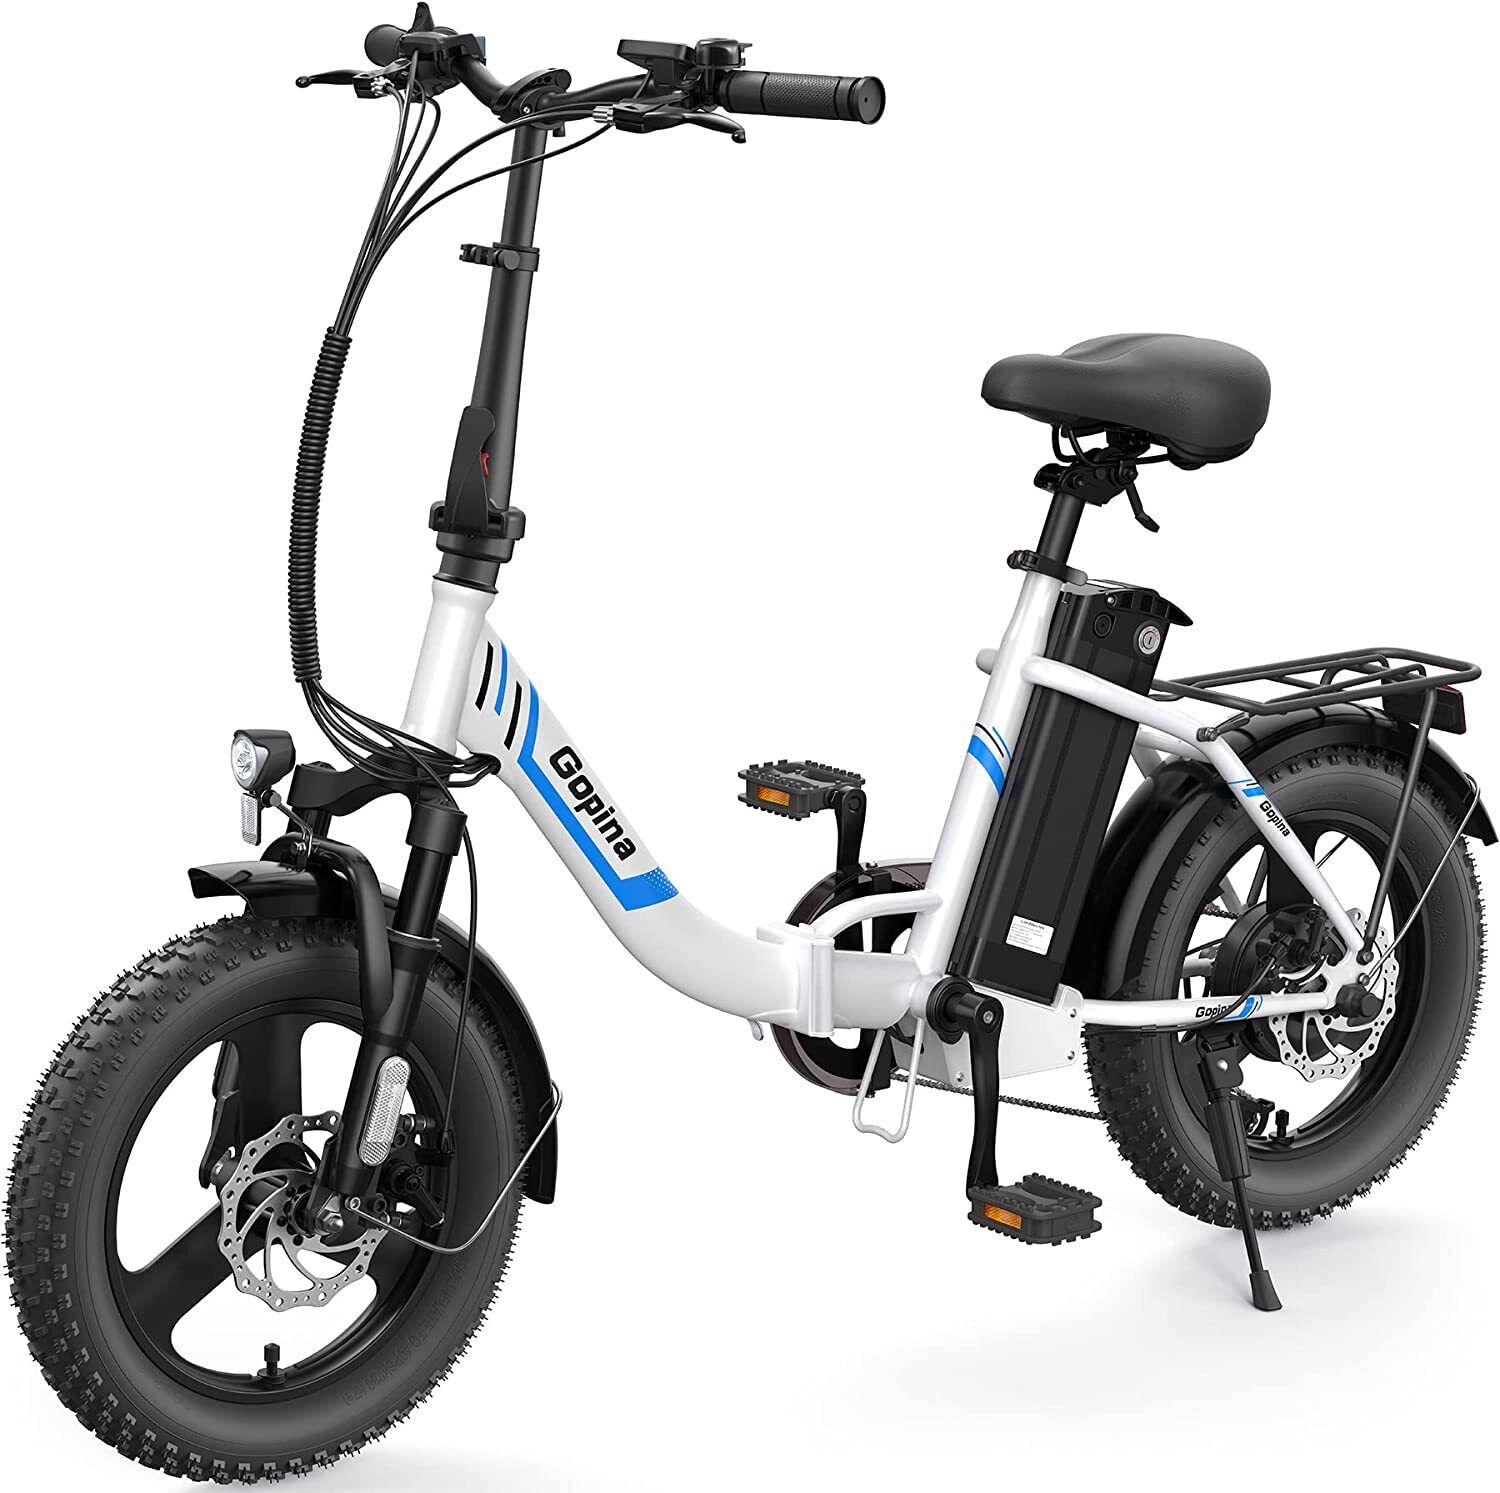 Electric Bicycle for Sale: 16" Fat Tire Electric Bike for Adults Foldable 350W 48V 20MPH Ebike Commuting US in Hacienda Heights, California